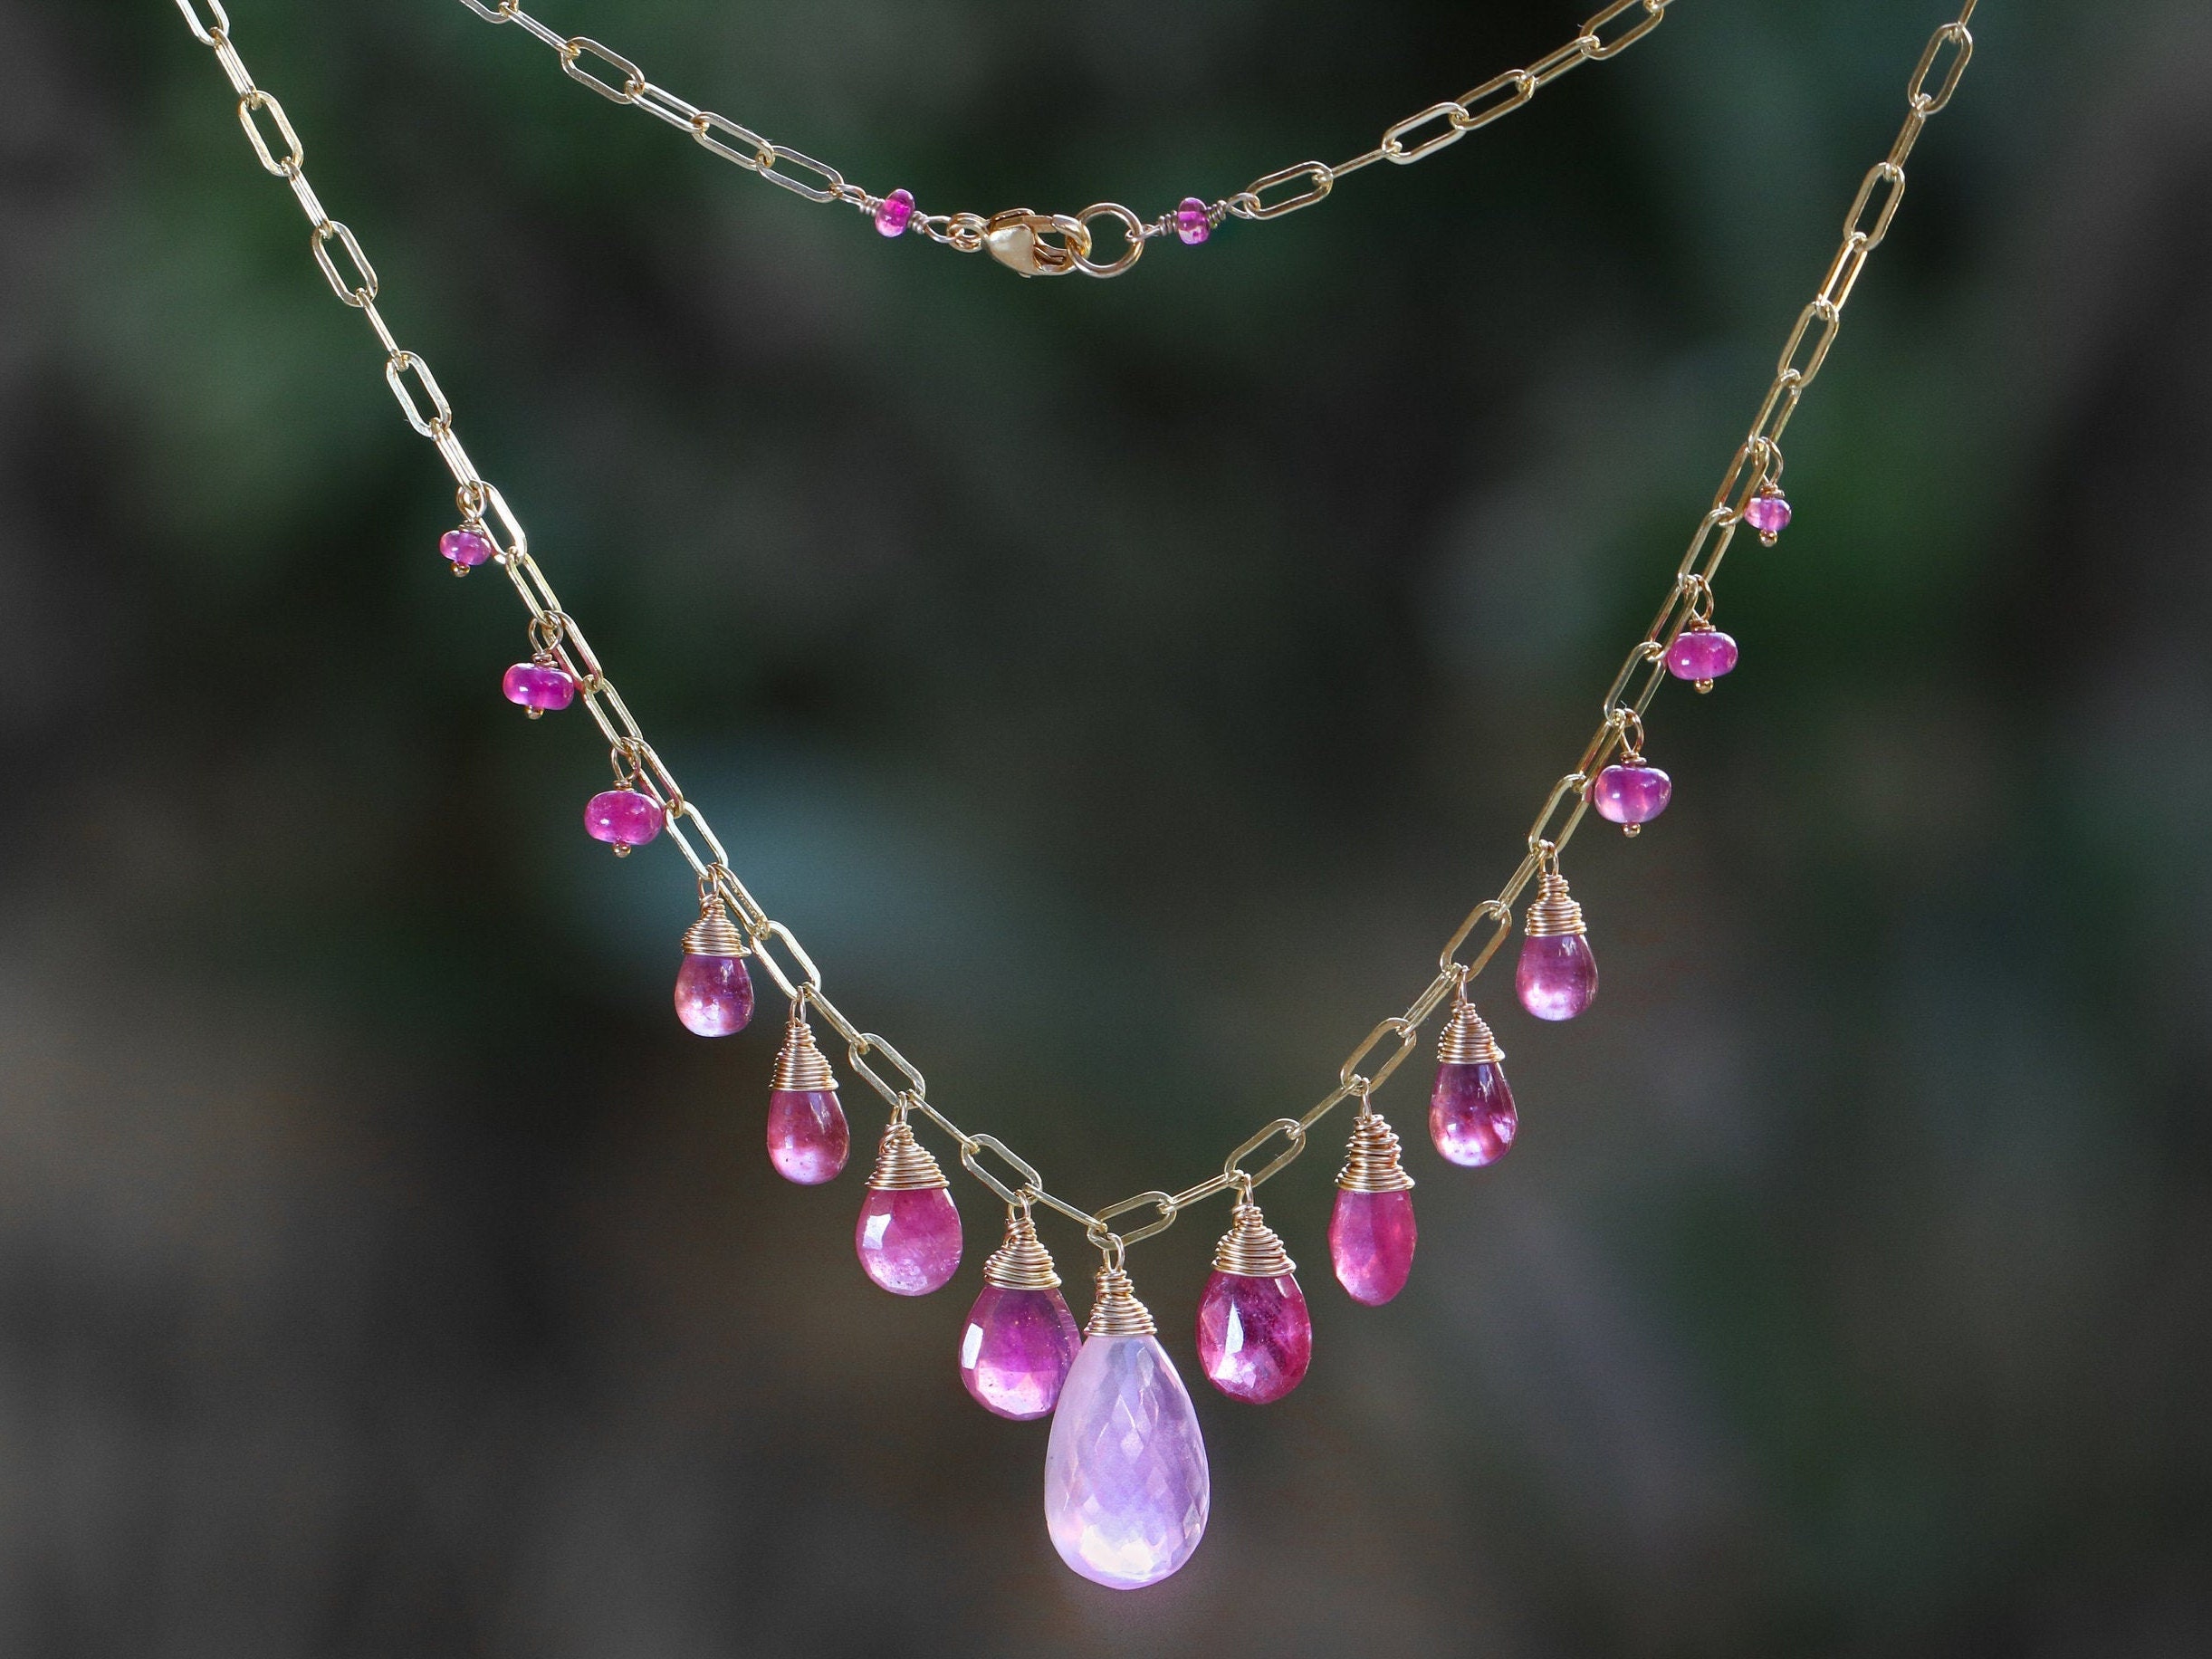 Pretty in Pink Sapphire Gold Chain (16 Inches) by GEHNA